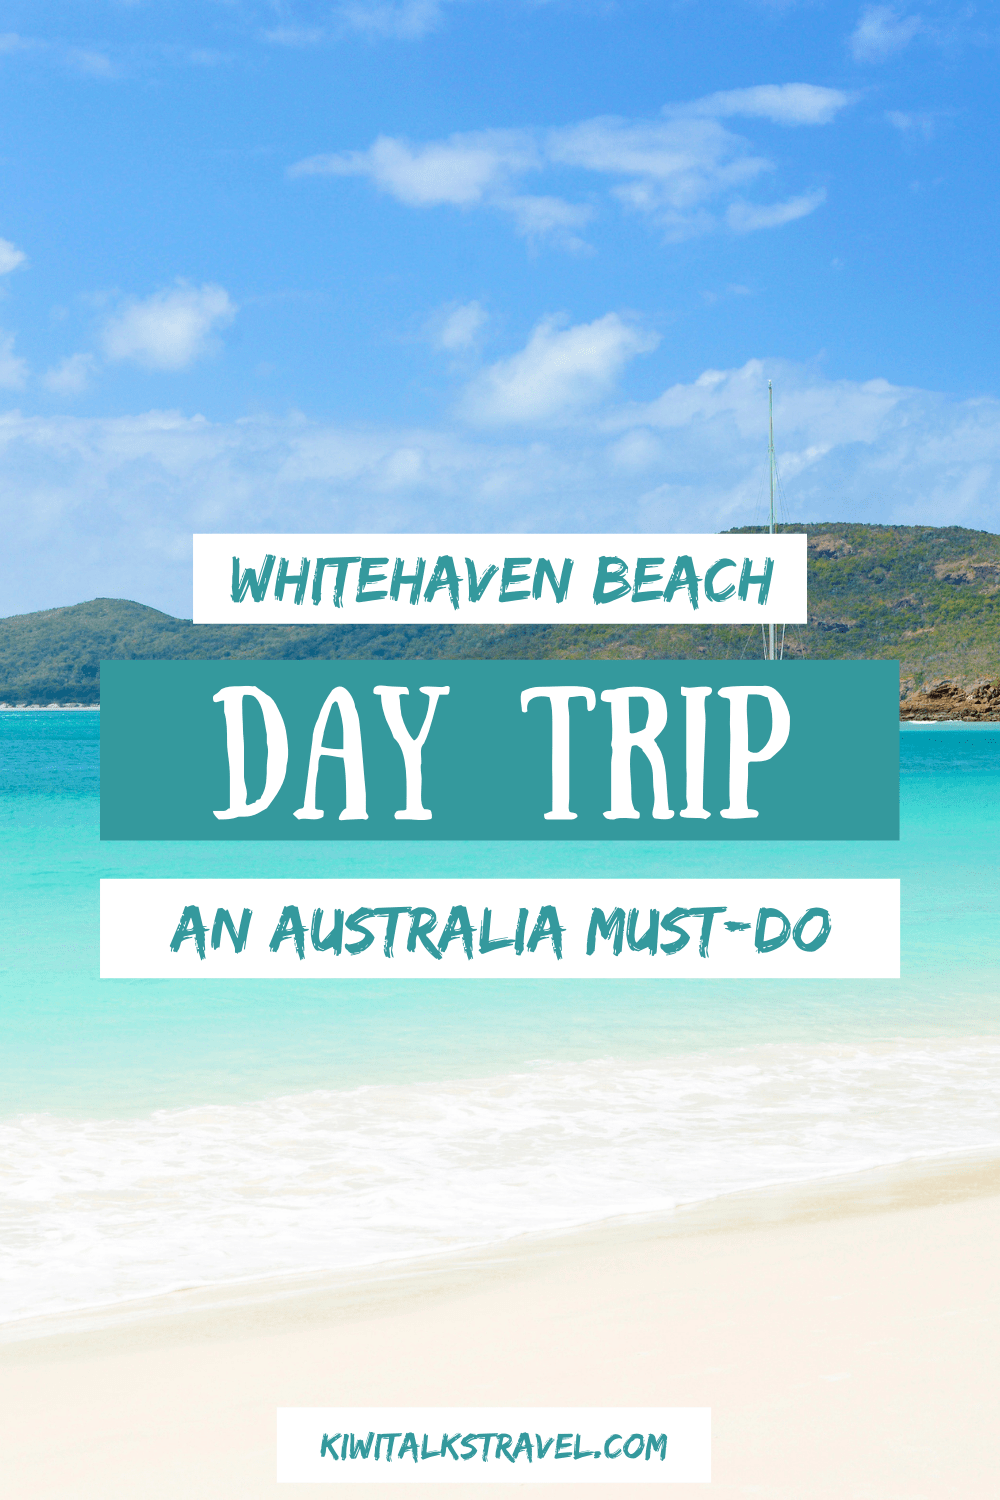 Each ocean rafting day includes an exhilarating ride to world famous whitehaven beach, hill inlet beach and lookout, pristine snorkelling reefs and guided whitsunday island national parks walks, all in one day! Whitehaven Beach Day Trip An Australia Must Do Kiwi Talks Travel